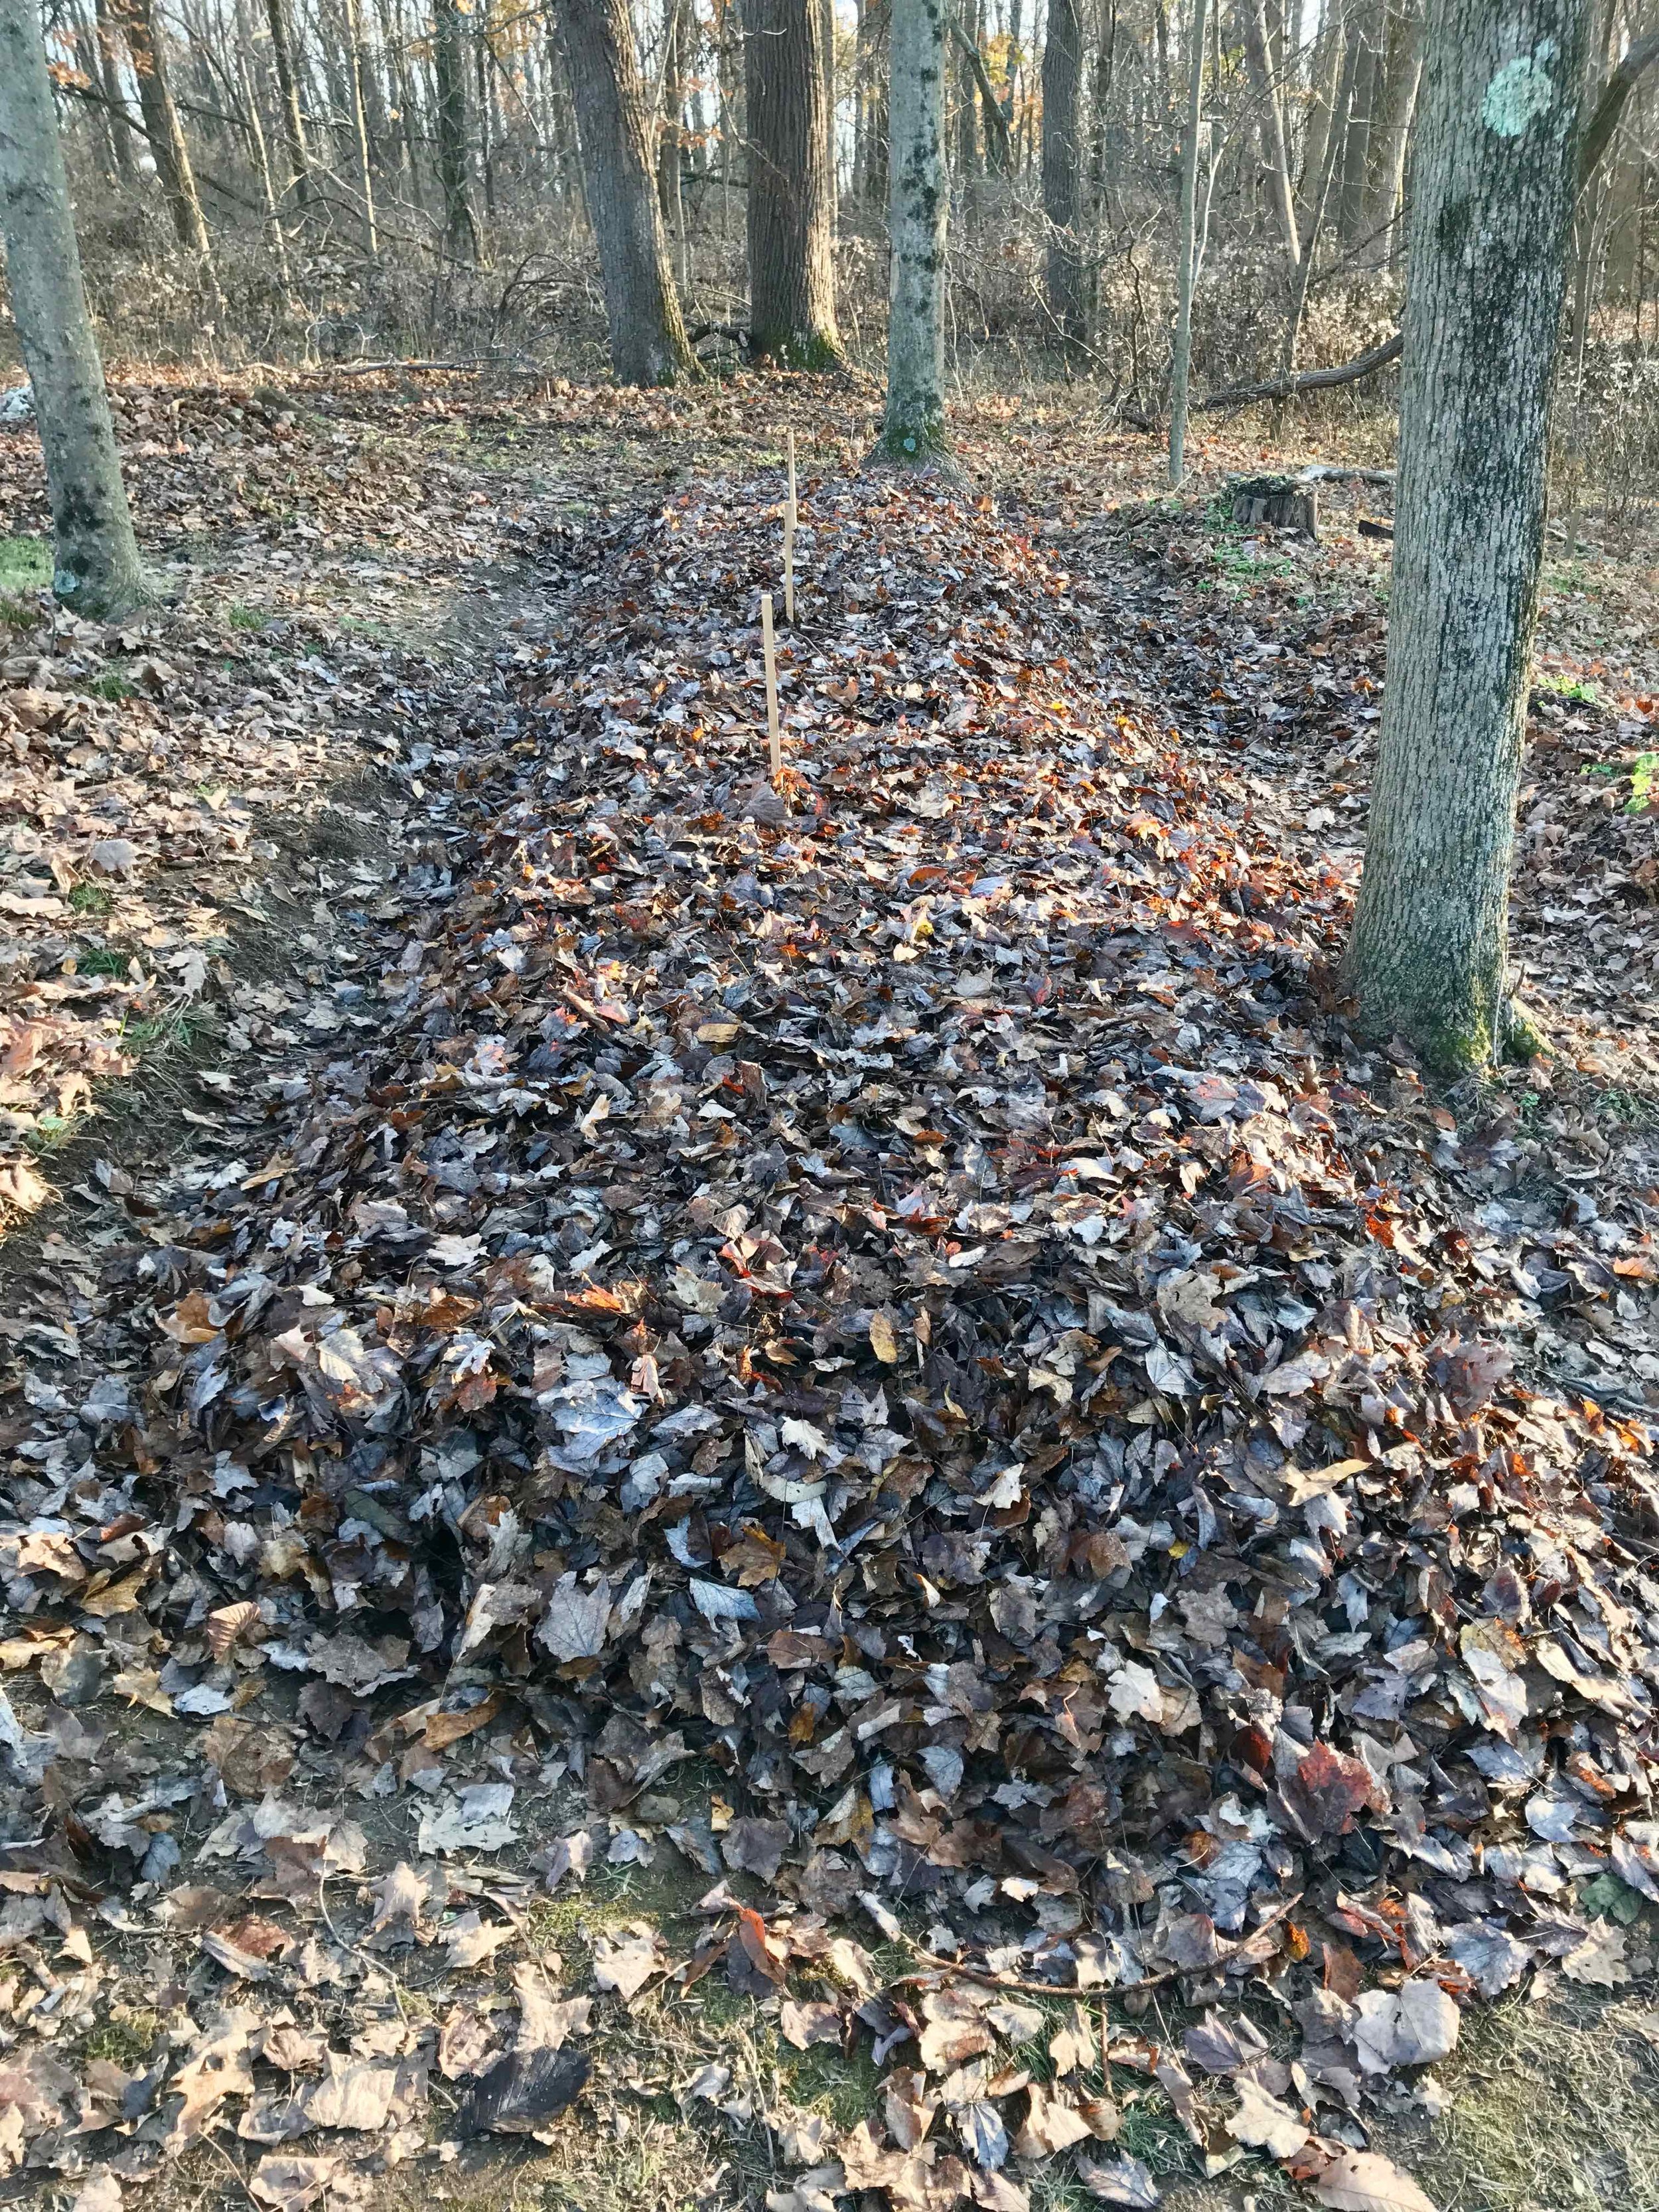 Finally, a thick layer of leaf mulch